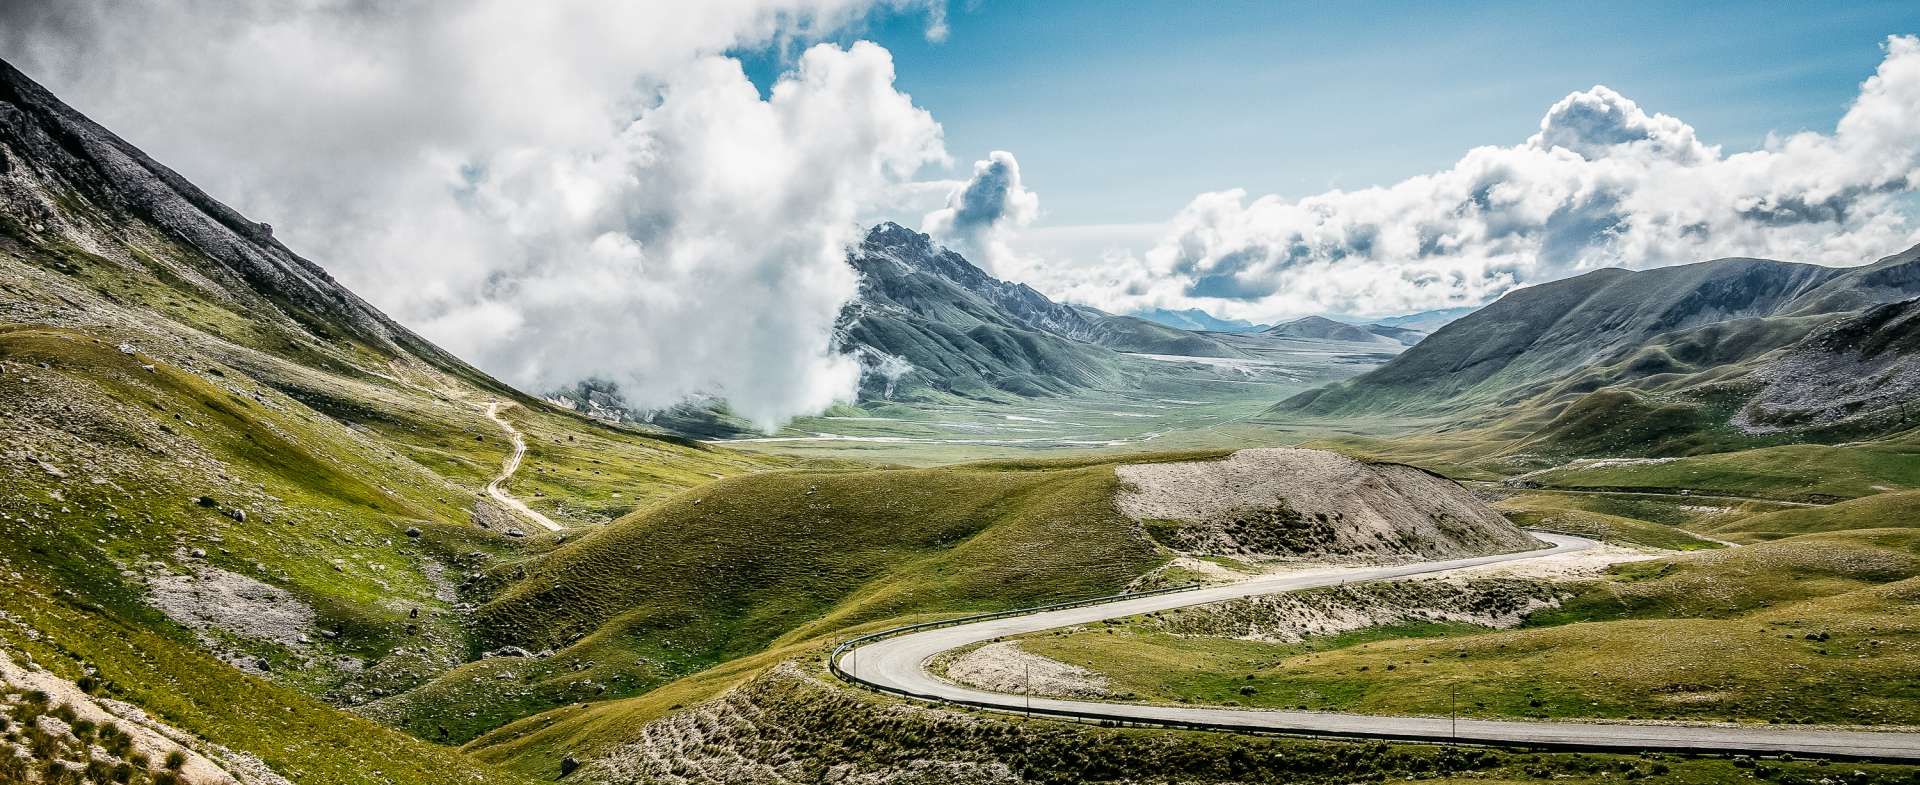 14 scenic roads in Italy (and some extras from the community)